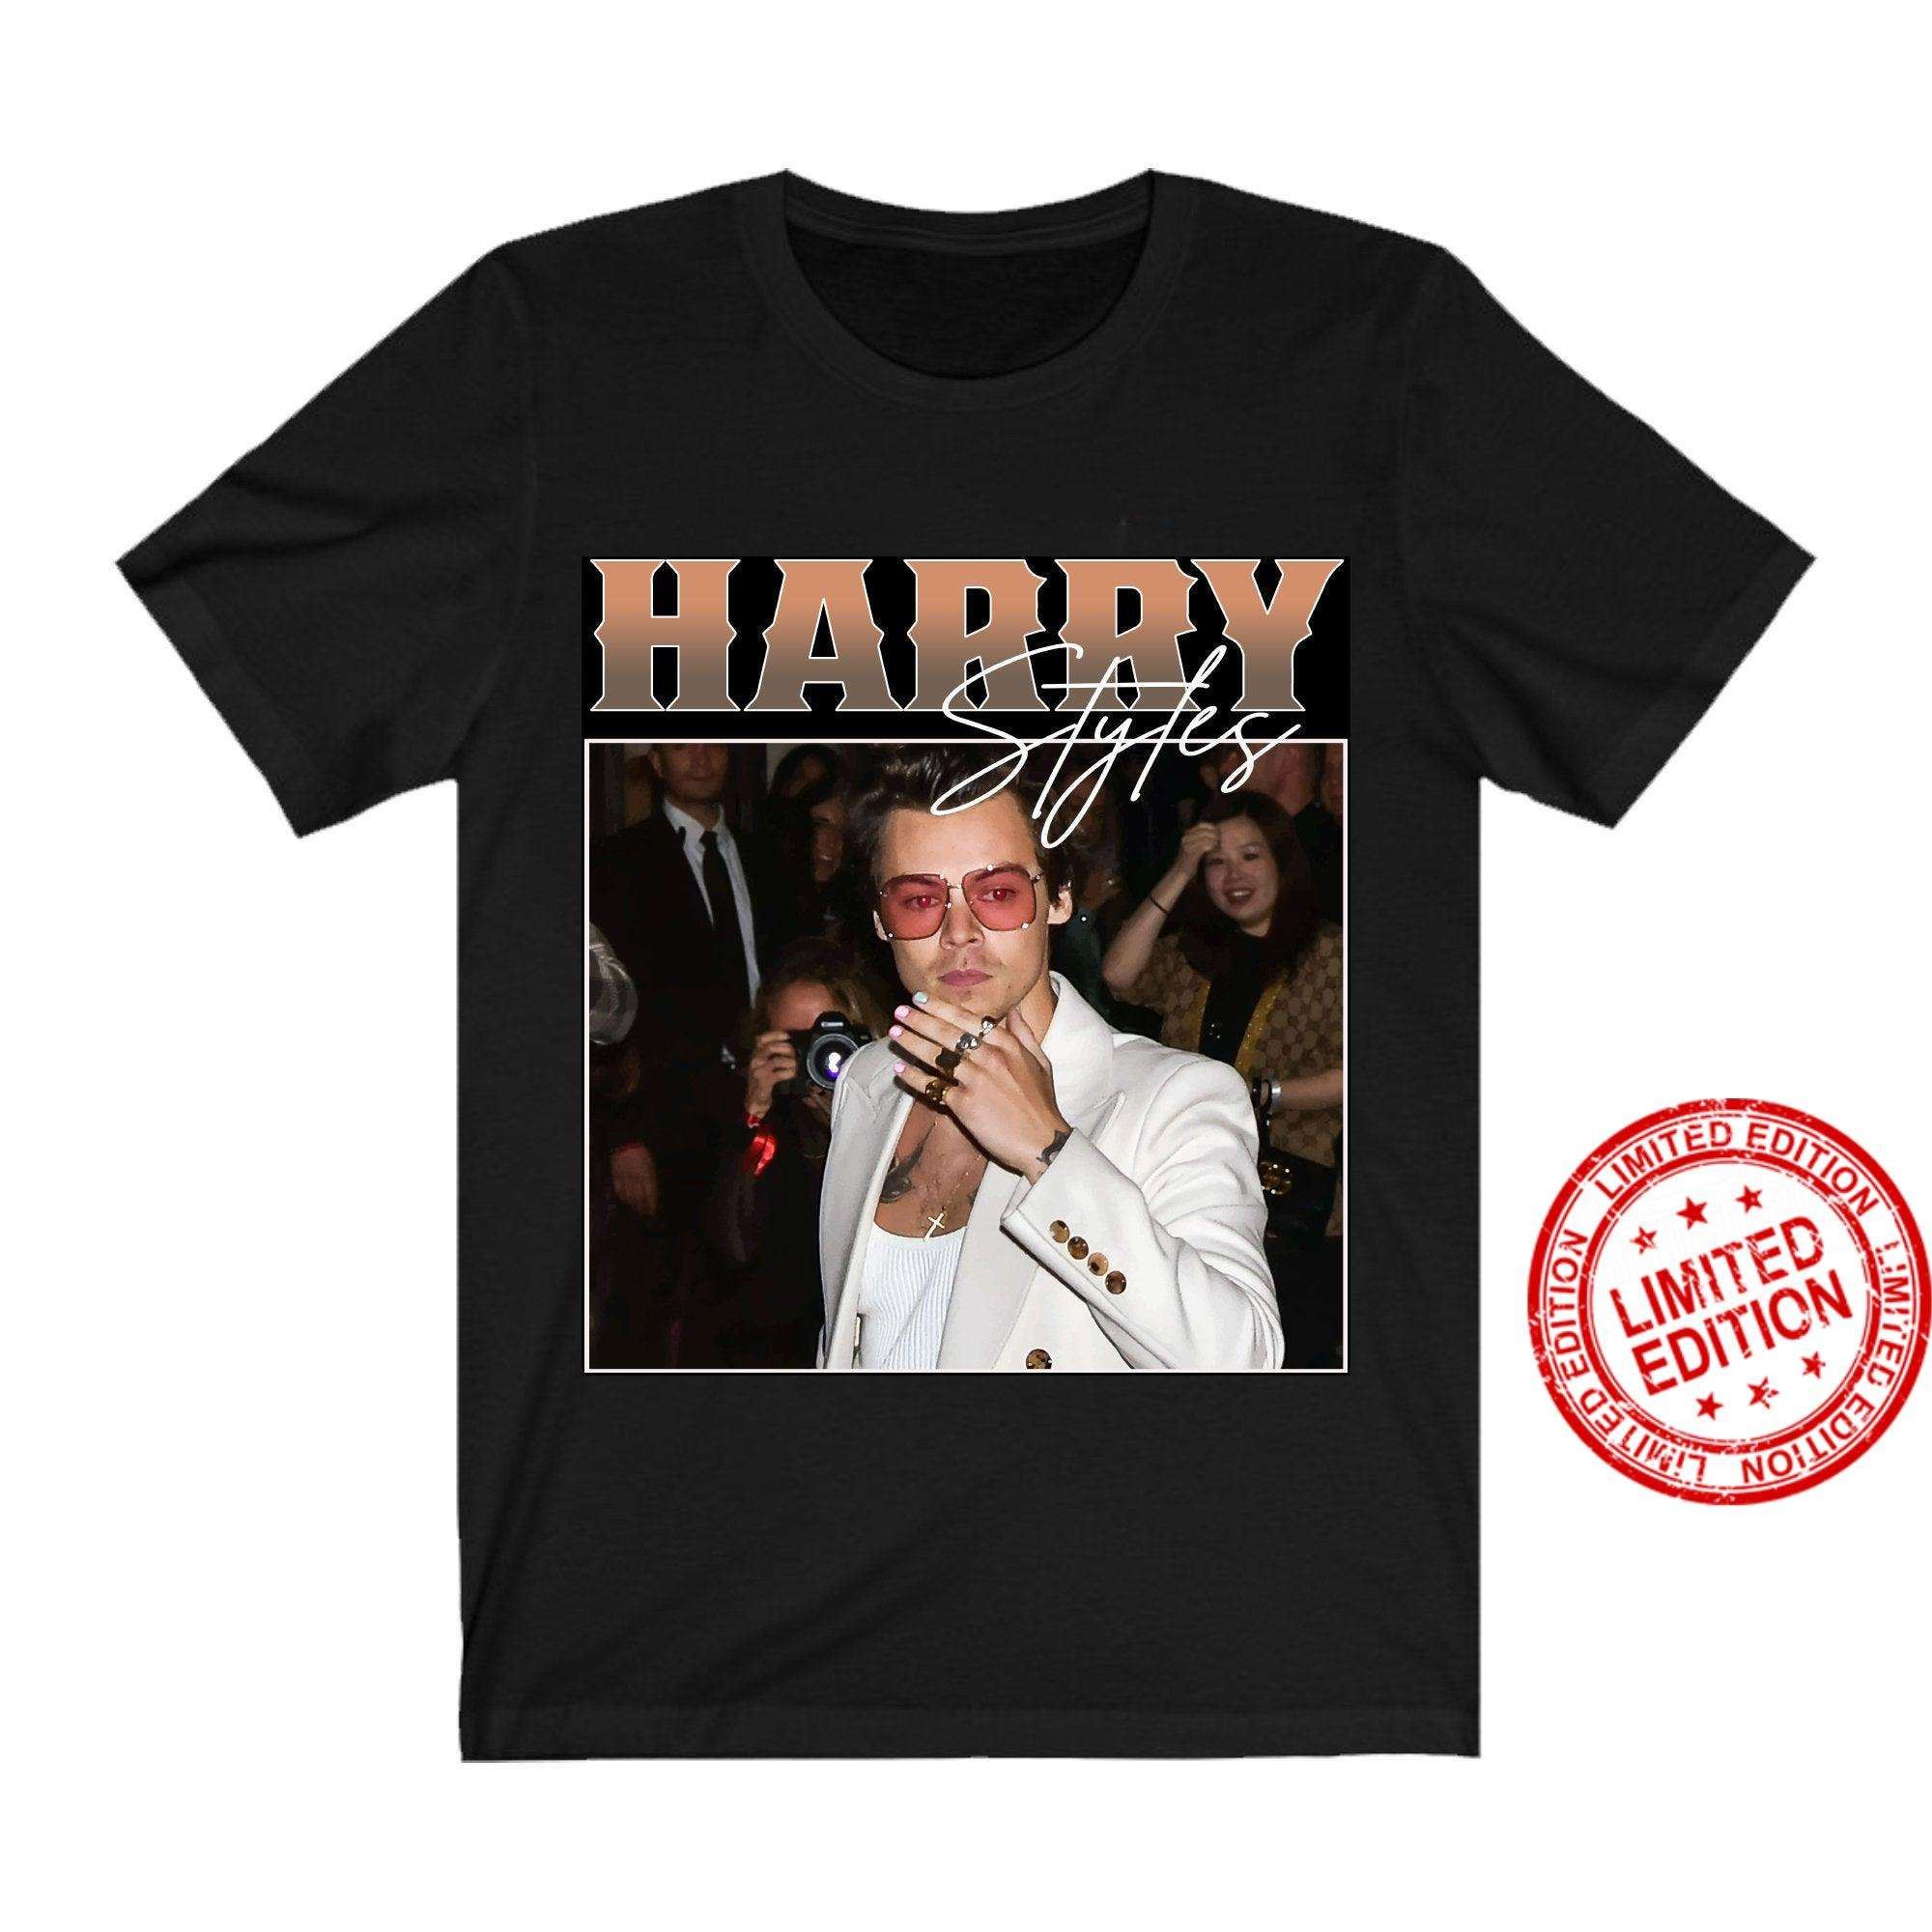 Harry Styles One Direction Harry Styles Vintage 90s T-shirt Size Up To 5xl